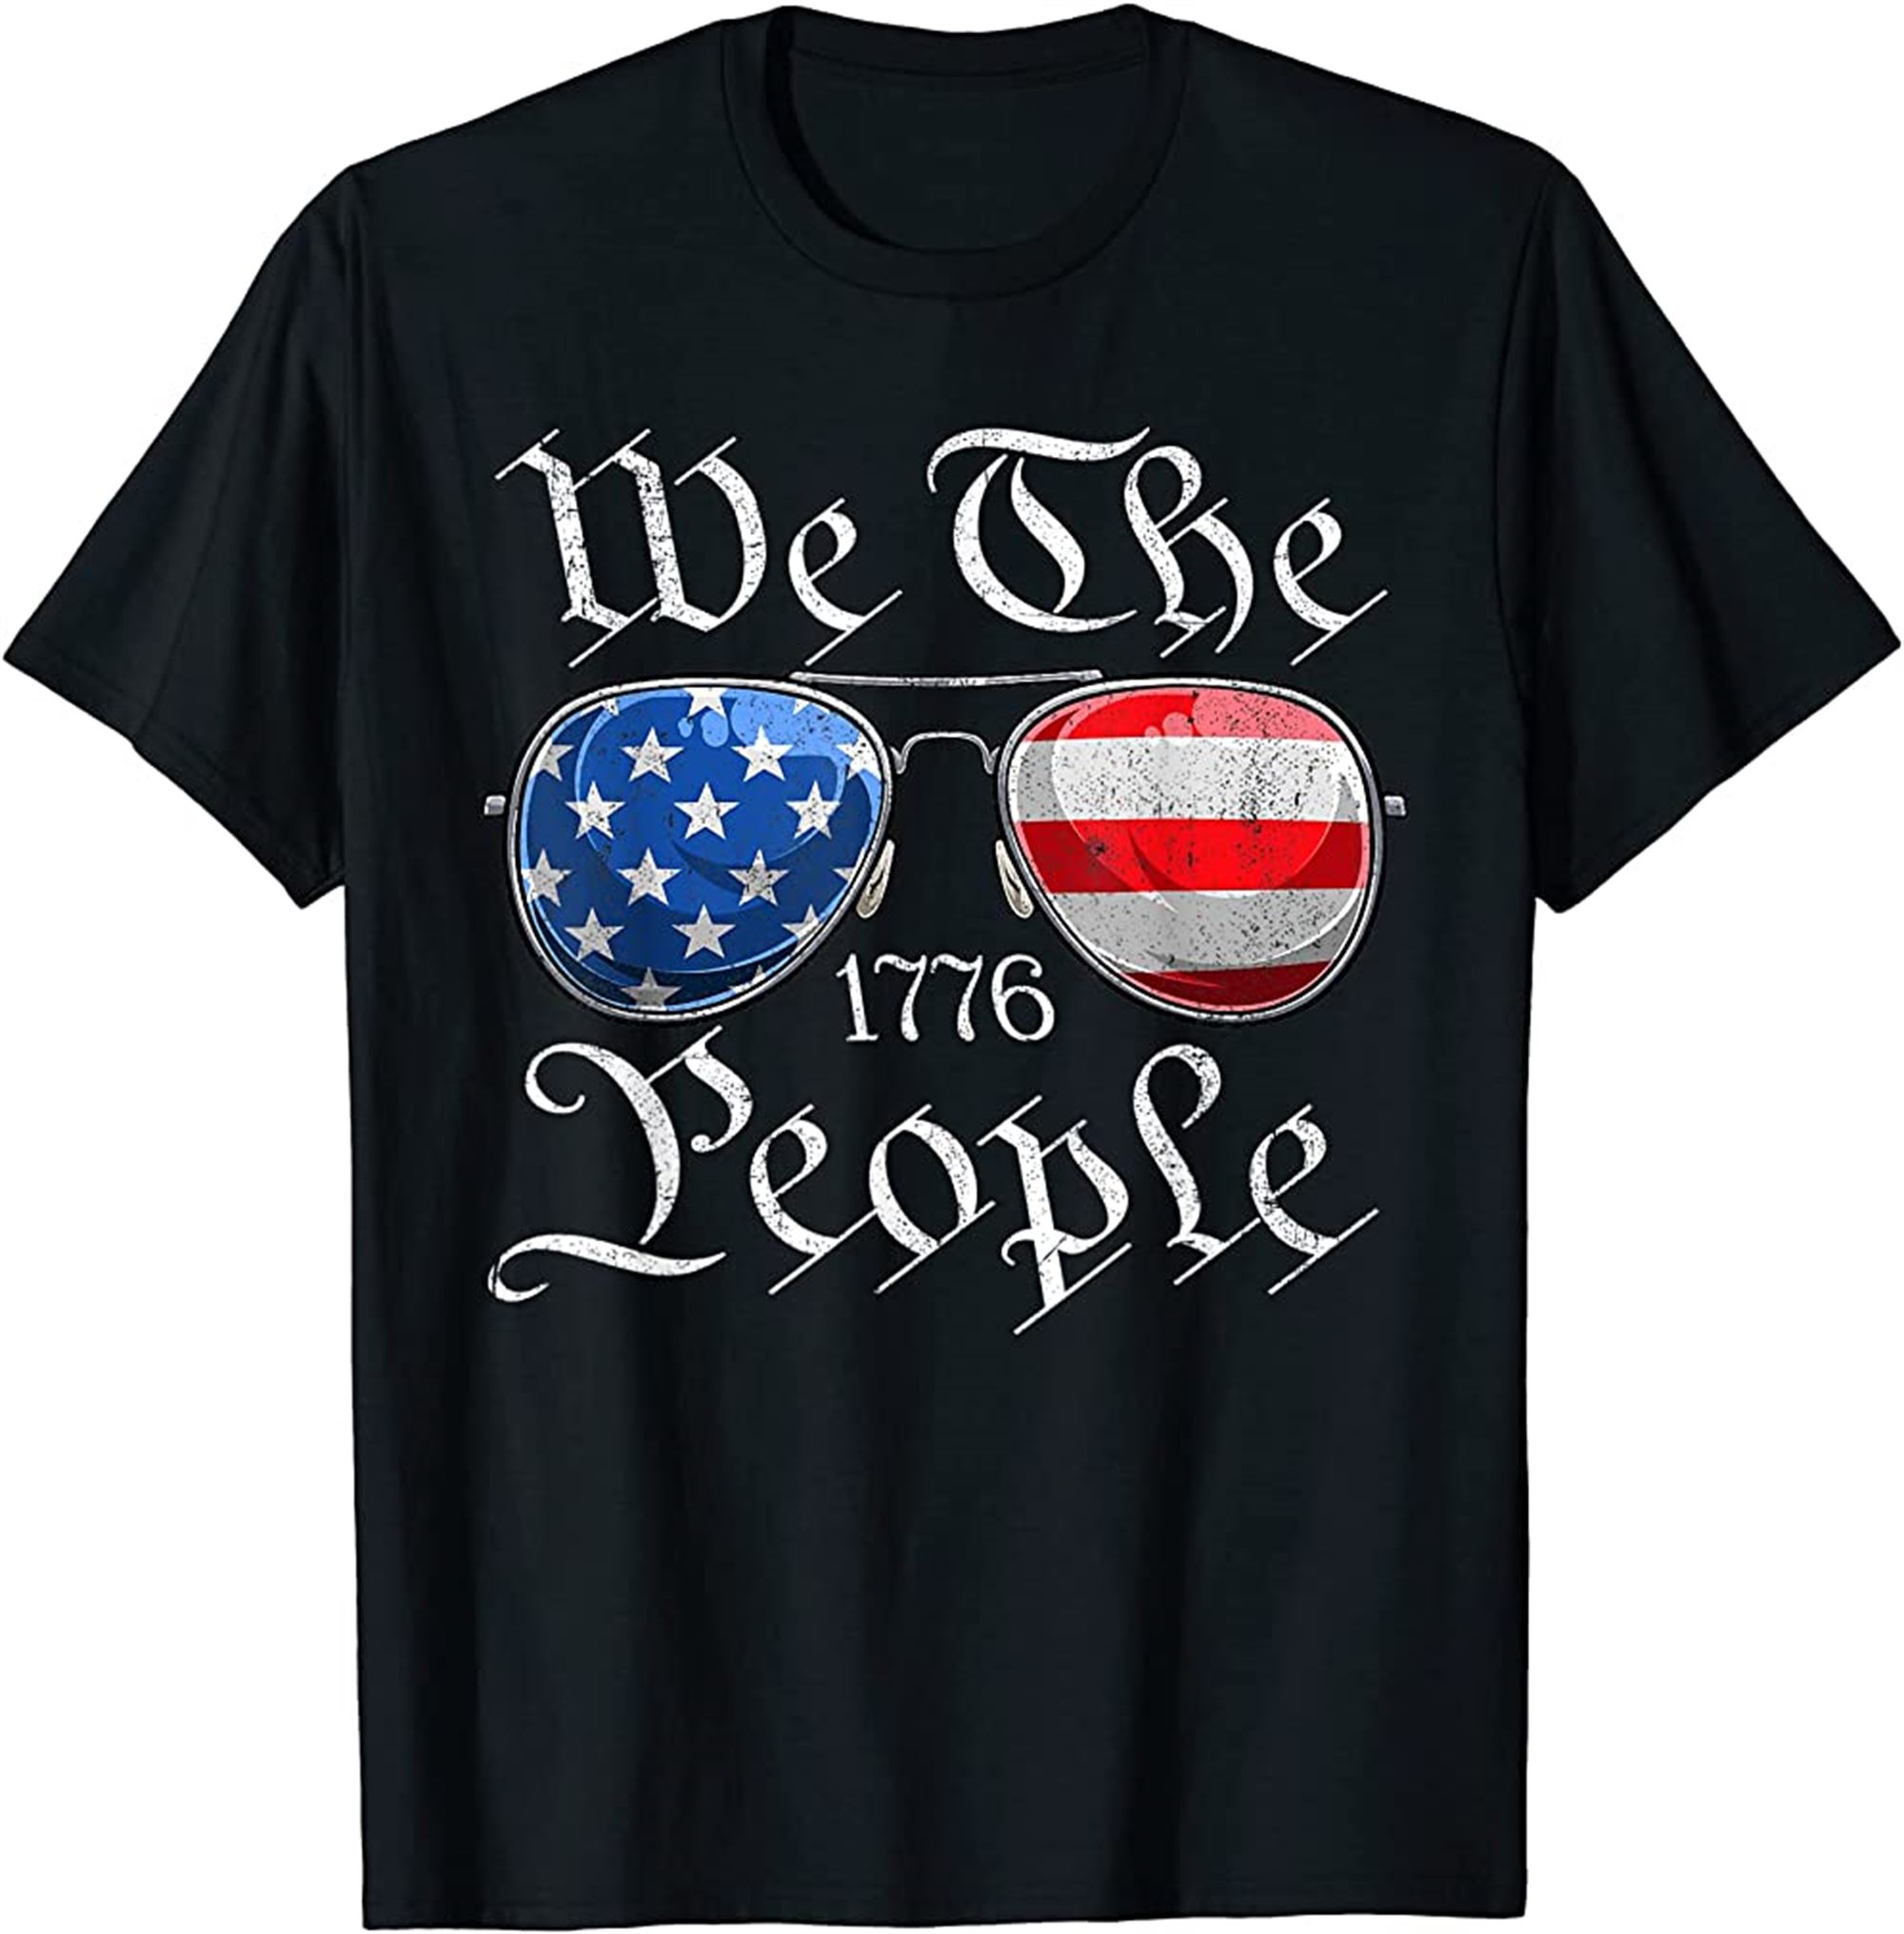 We The People Usa Funny 4th Of July American Flag Sunglasses T-shirt Plus Size Up To 5xl